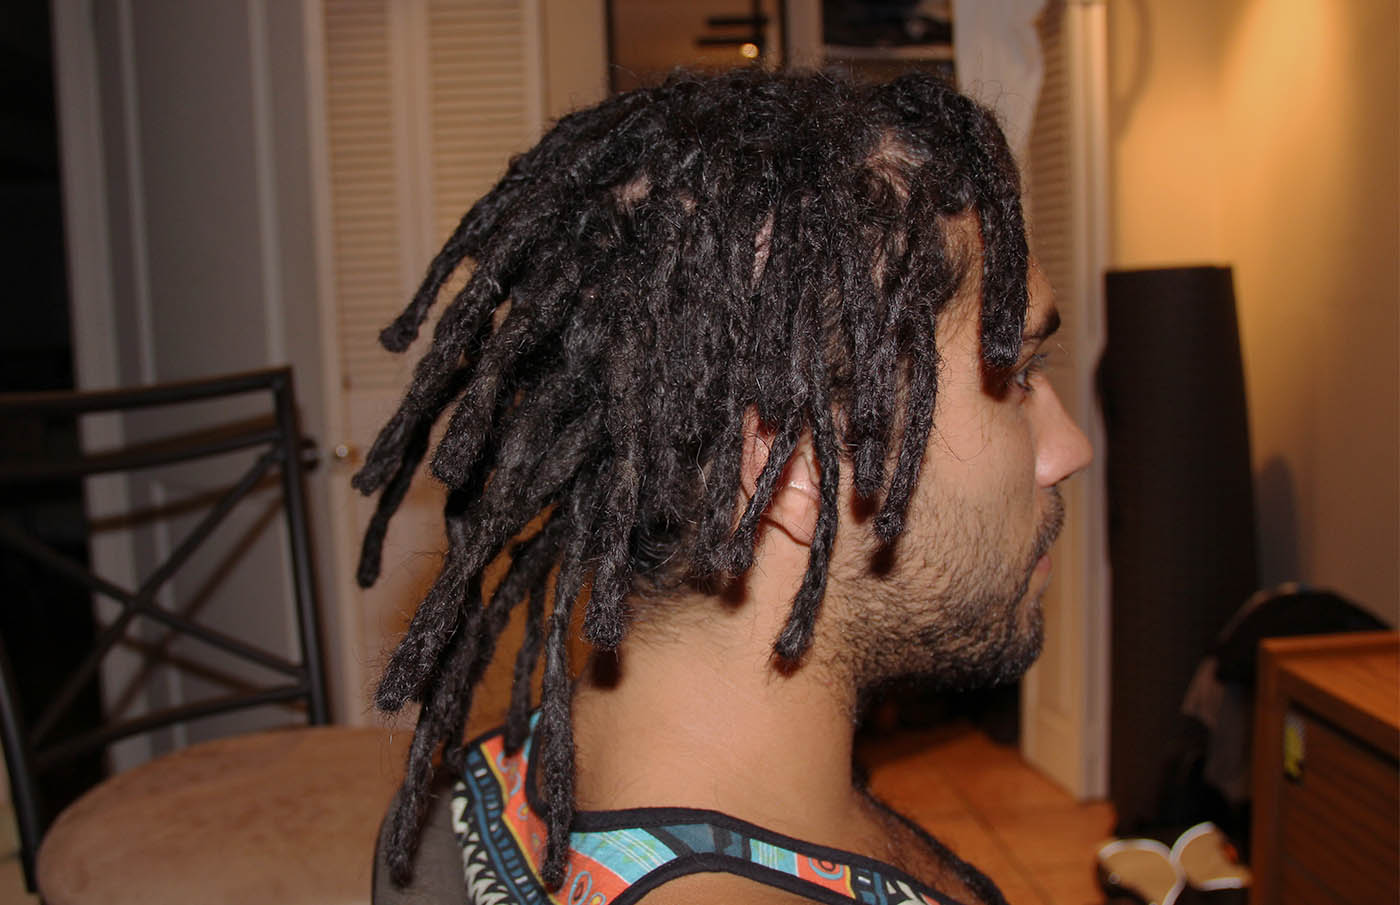 Jonathan's dreadlocks by Dreads MTL. Nice black dreads on white guy from Quebec.